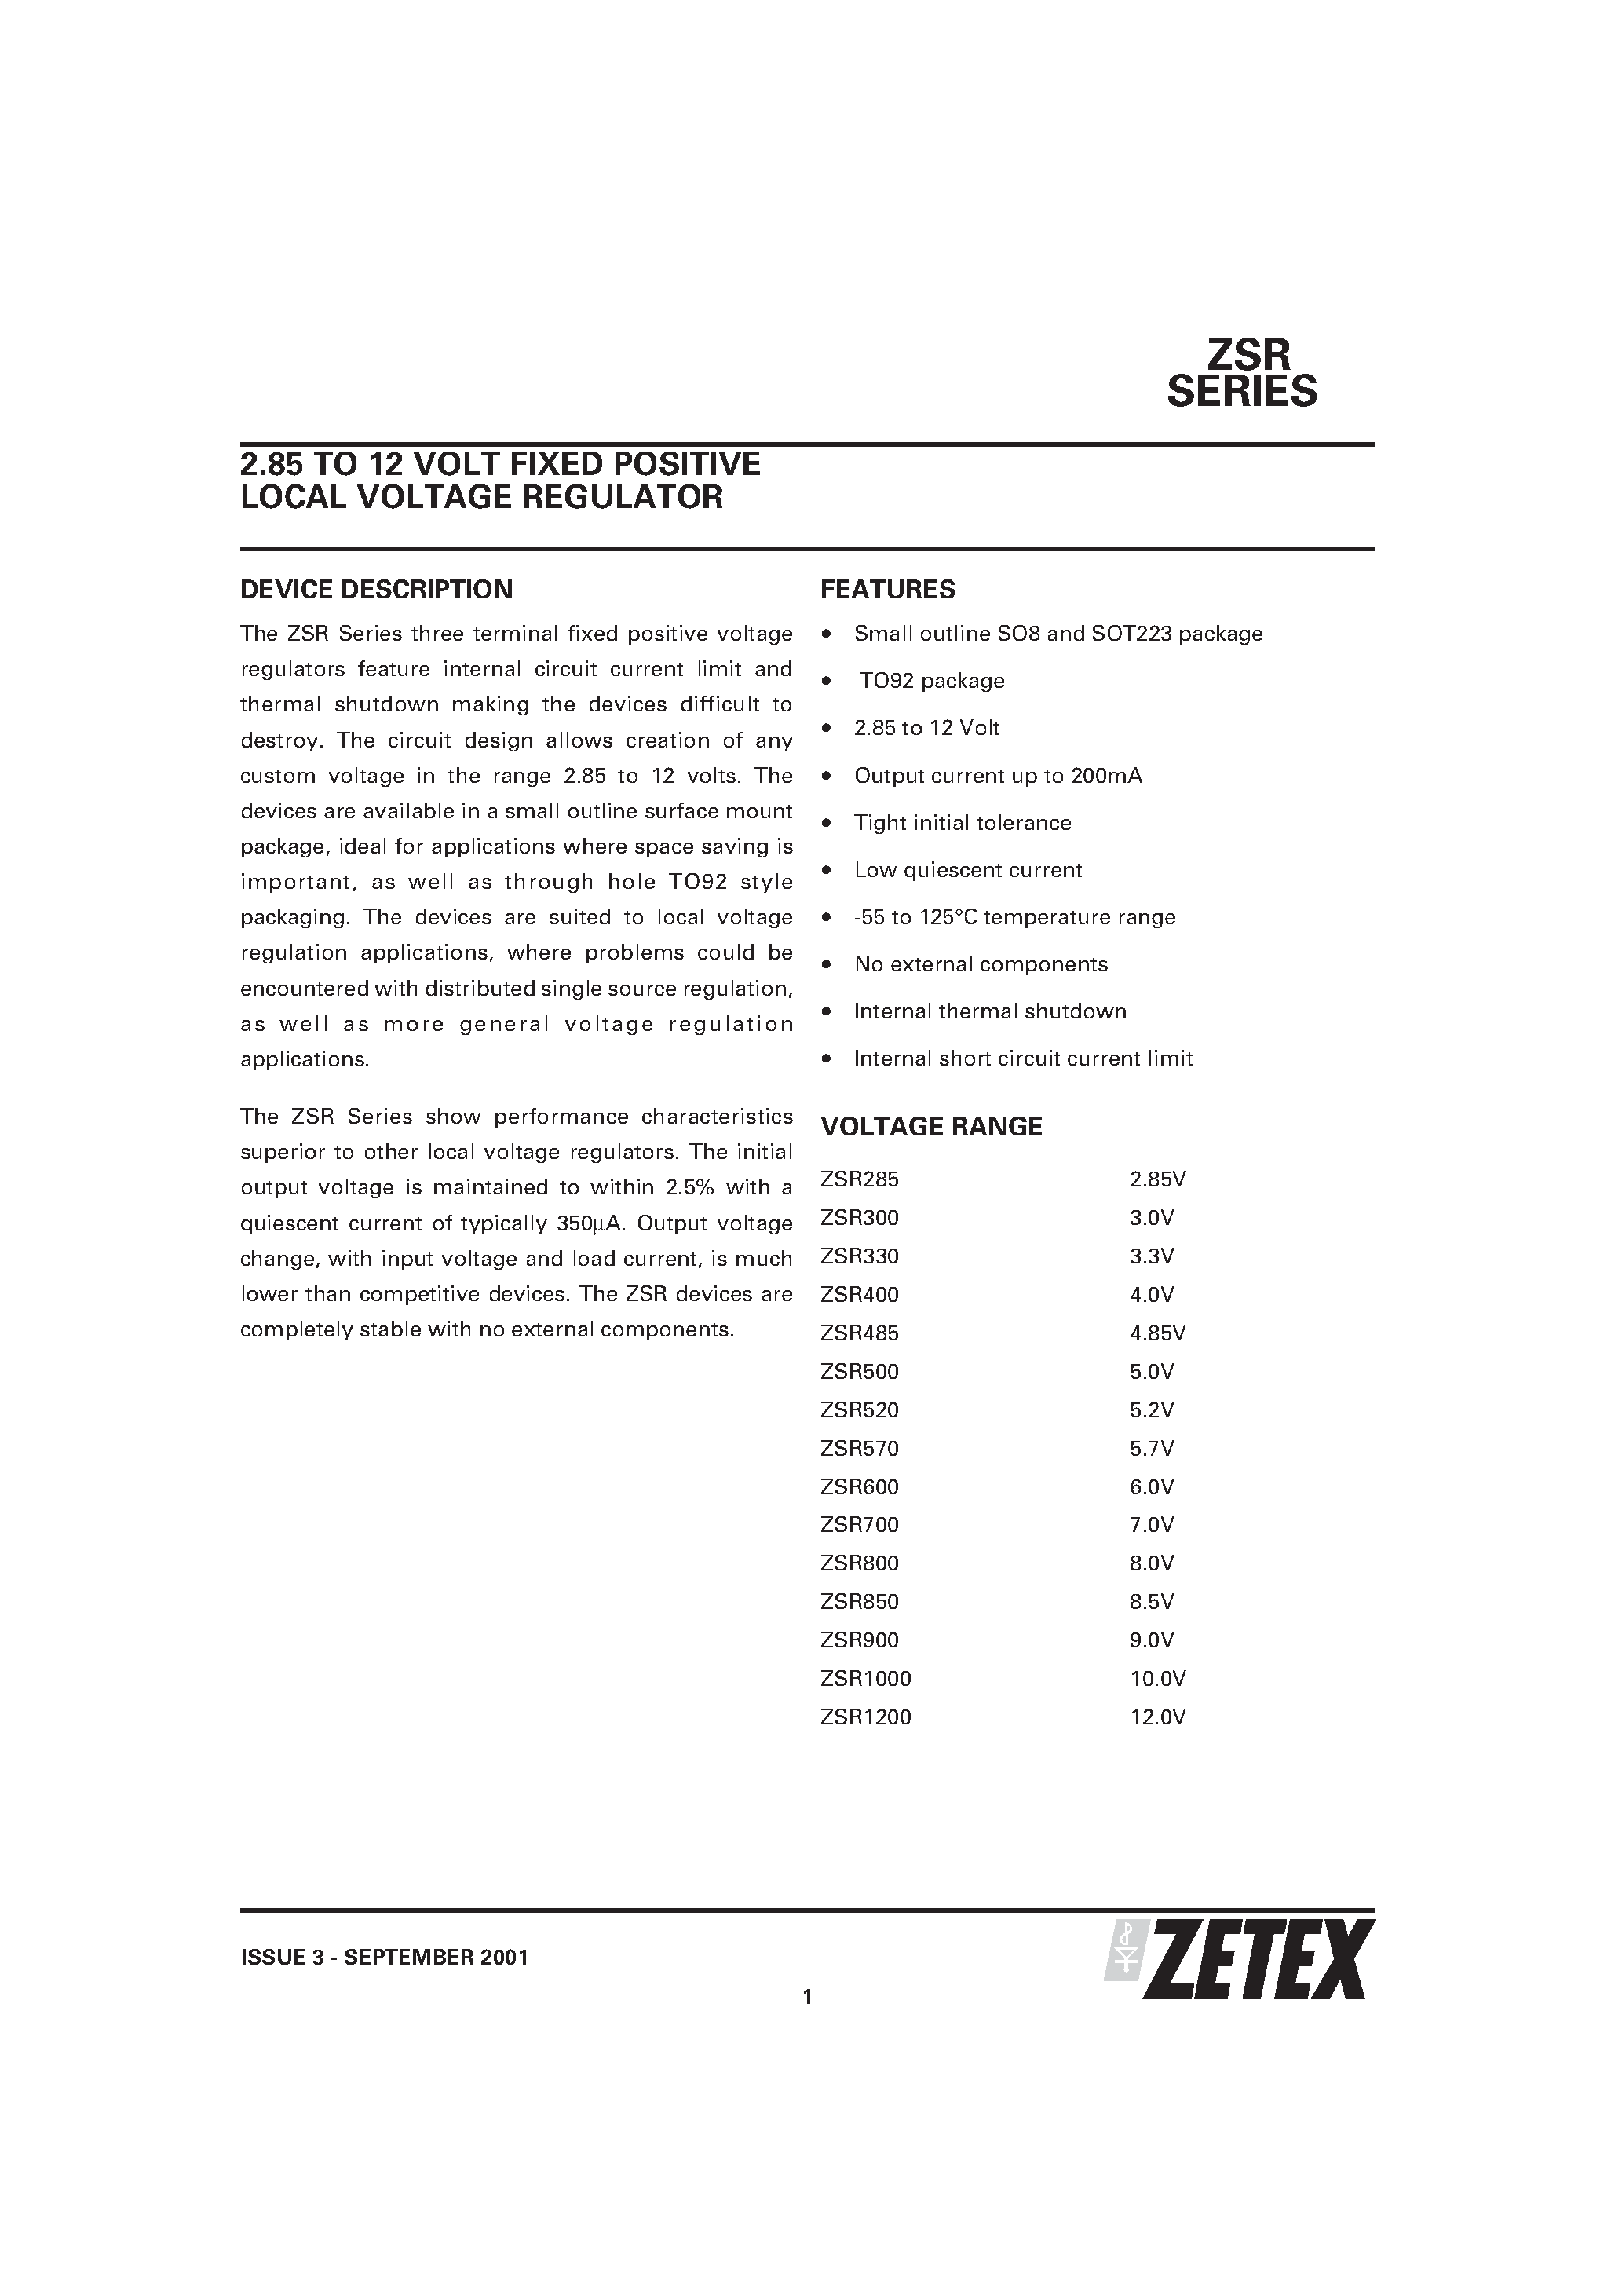 Datasheet ZSR300G - 2.85 TO 12 VOLT FIXED POSITIVE LOCAL VOLTAGE REGULATOR page 1